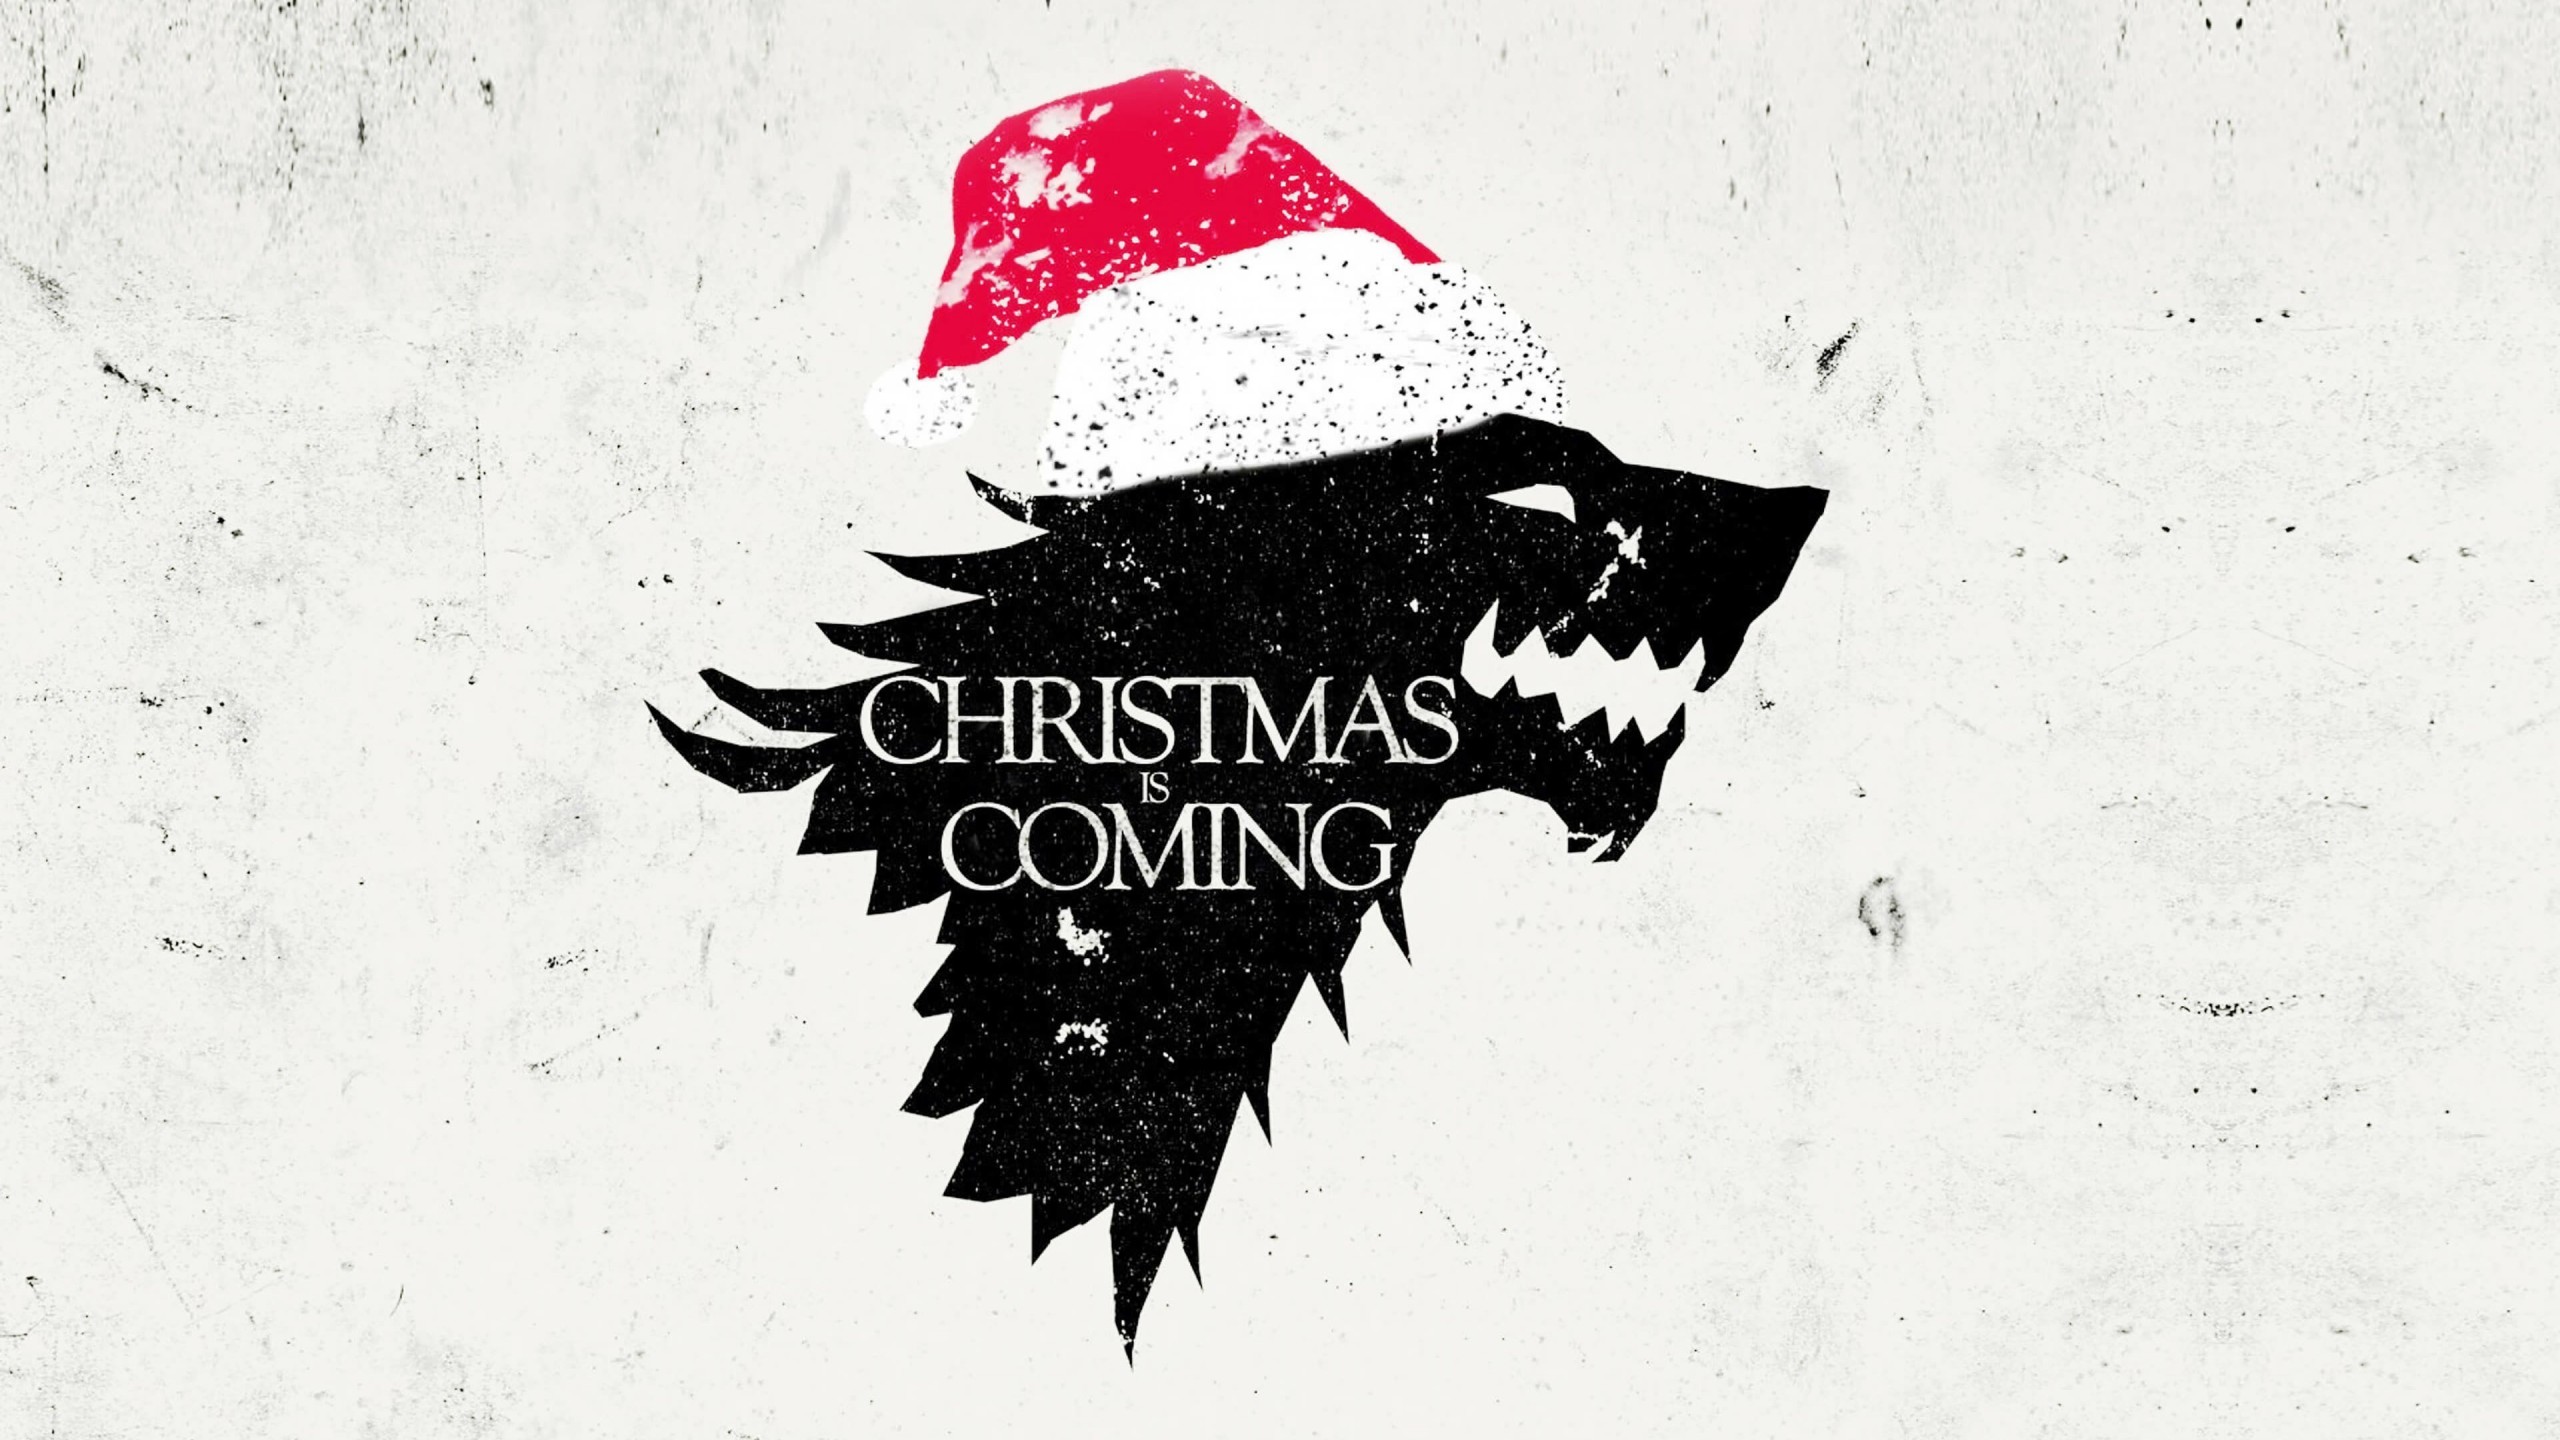 Christmas is Coming Wallpaper for Social Media YouTube Channel Art